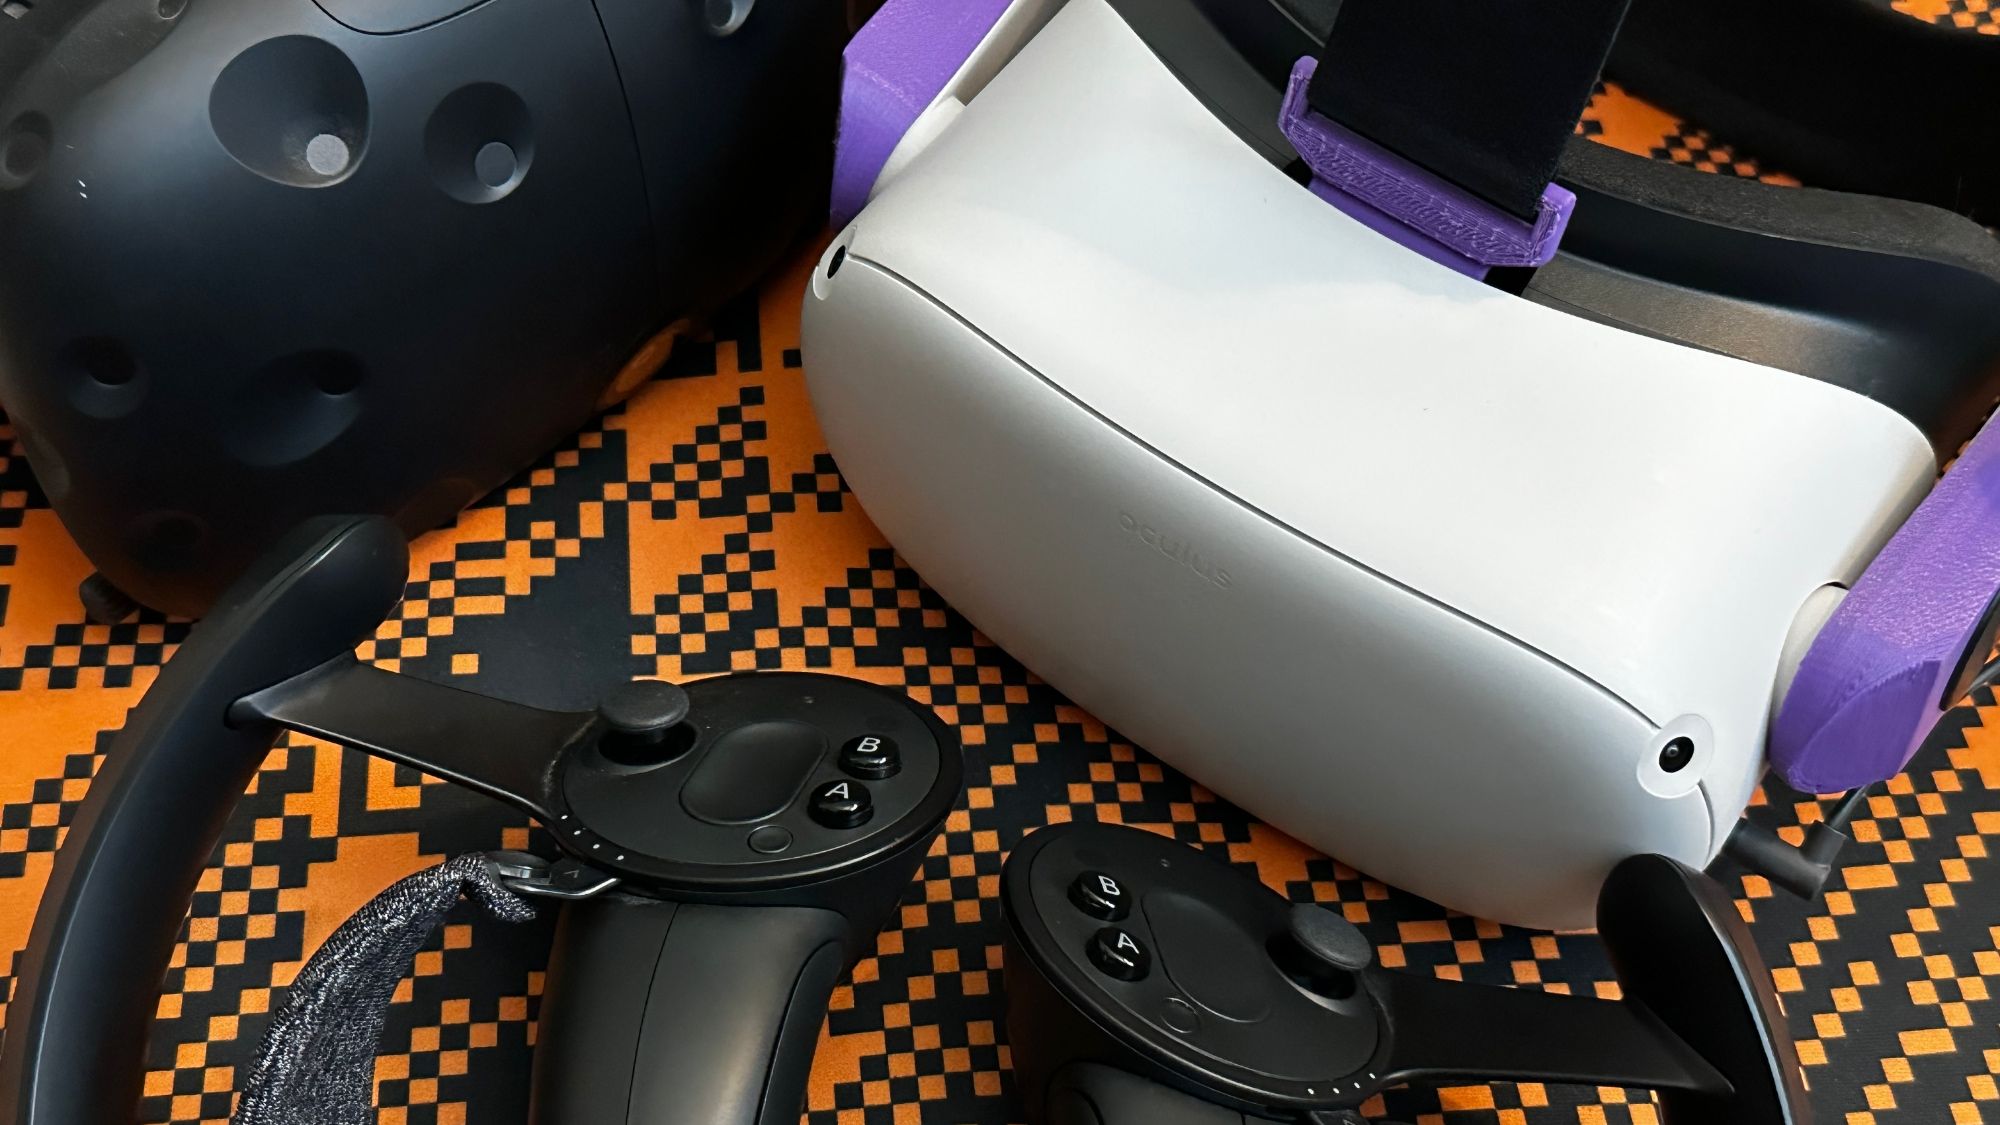 How To Use The Oculus Quest 2 with Valve Index Controllers Via an HTC Vive Headset Instead of USB Tracker Dongles